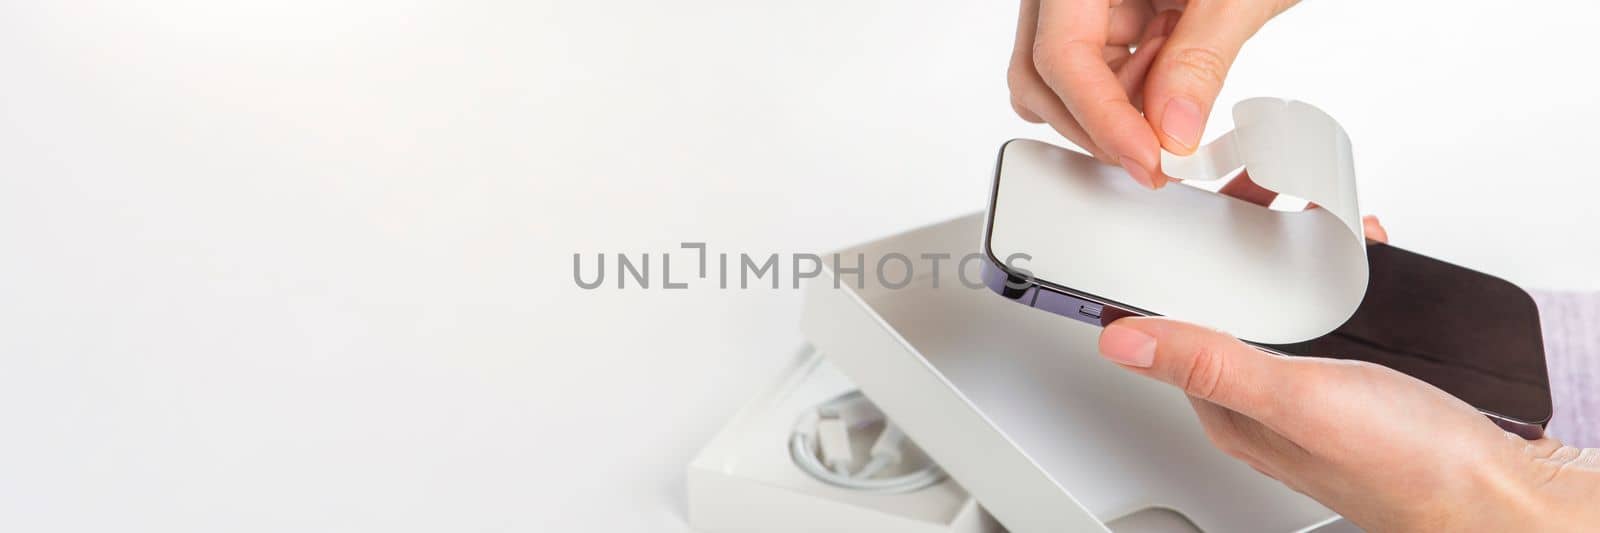 Unpacking a new phone. Remove the protective white film from the new phone. Close-up of a woman's hands removing a protective film from a phone in a purple case. Copy space on white background. by SERSOL